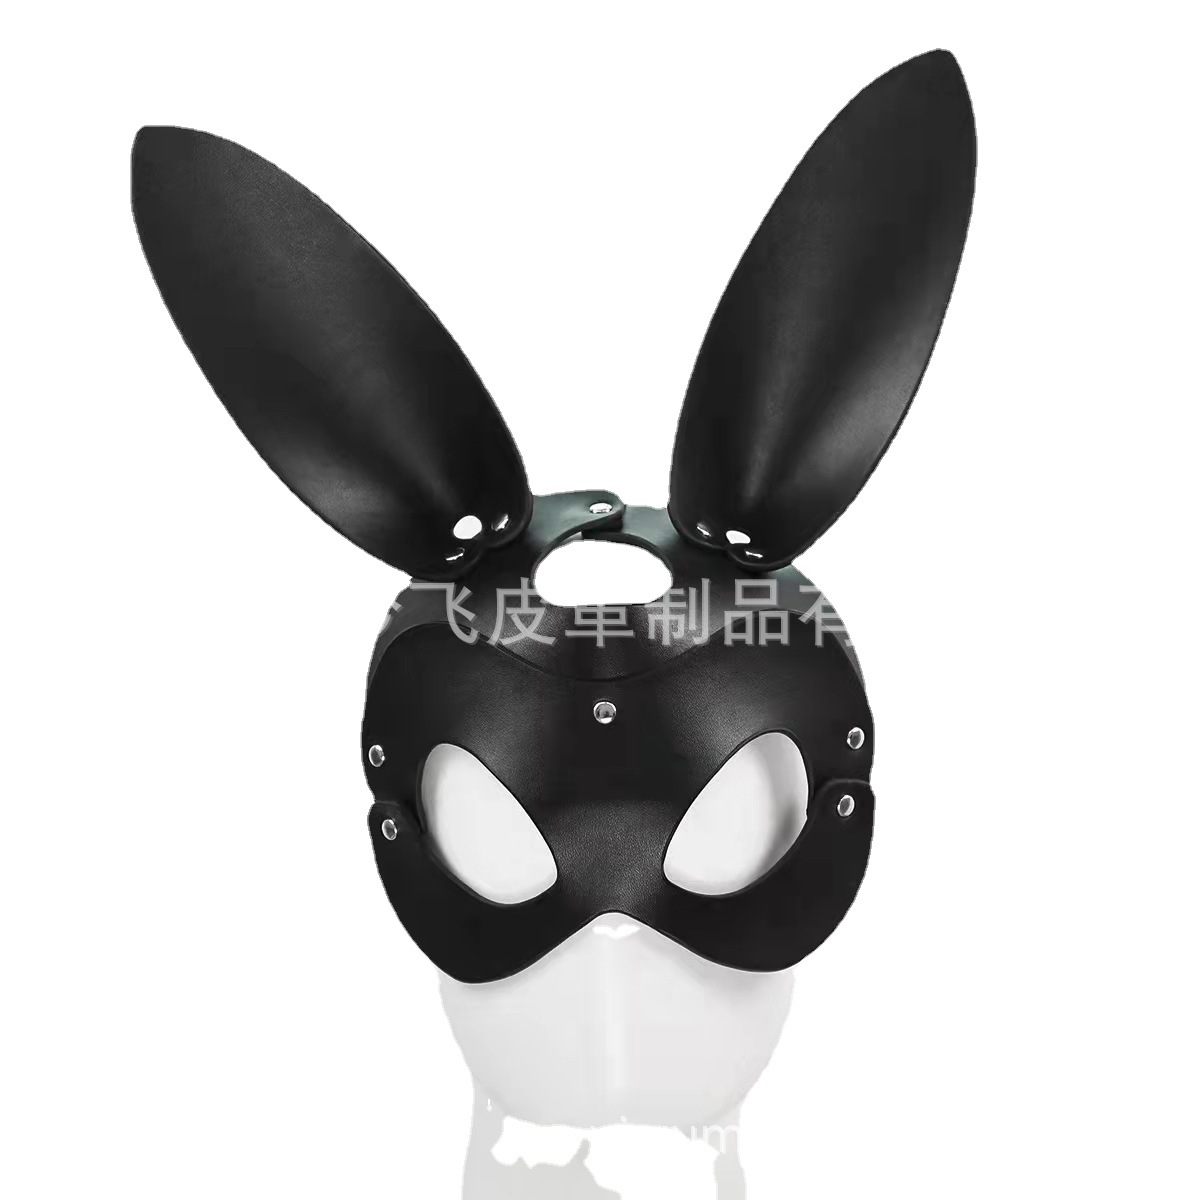 Hot Selling Women's Sexy Mask Leather Rabbit Cat Face Eye Mask Supplies Adult Fox Mask SM Sex Product Generation Hair